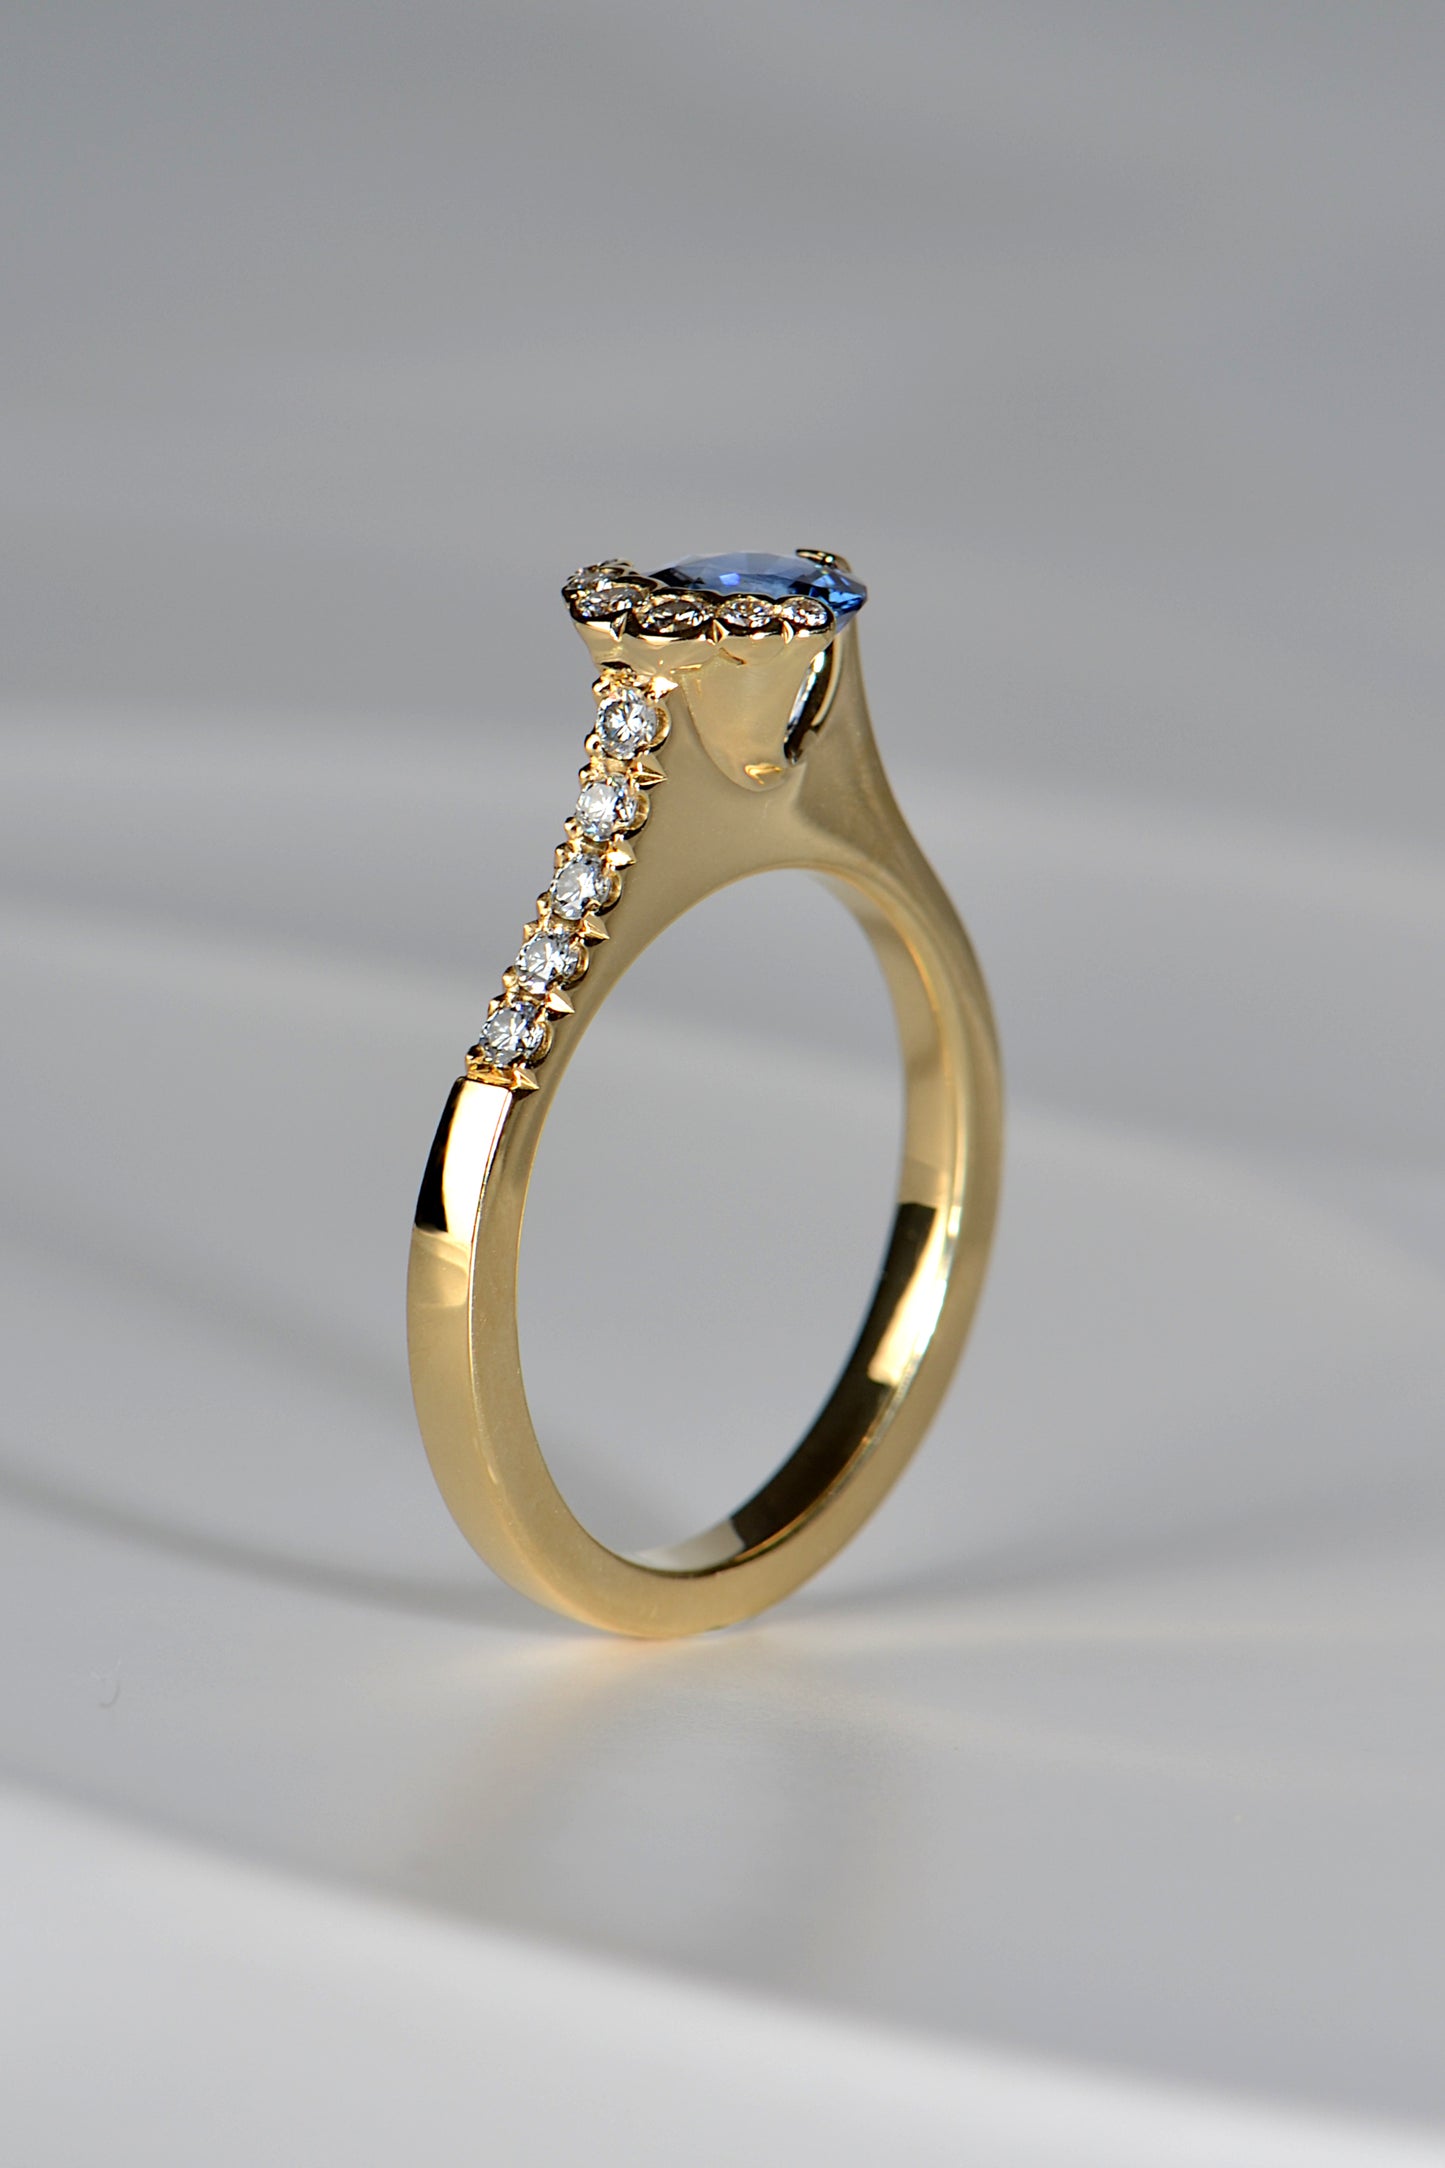 Fairypools blue sapphire 18ct yellow gold ring